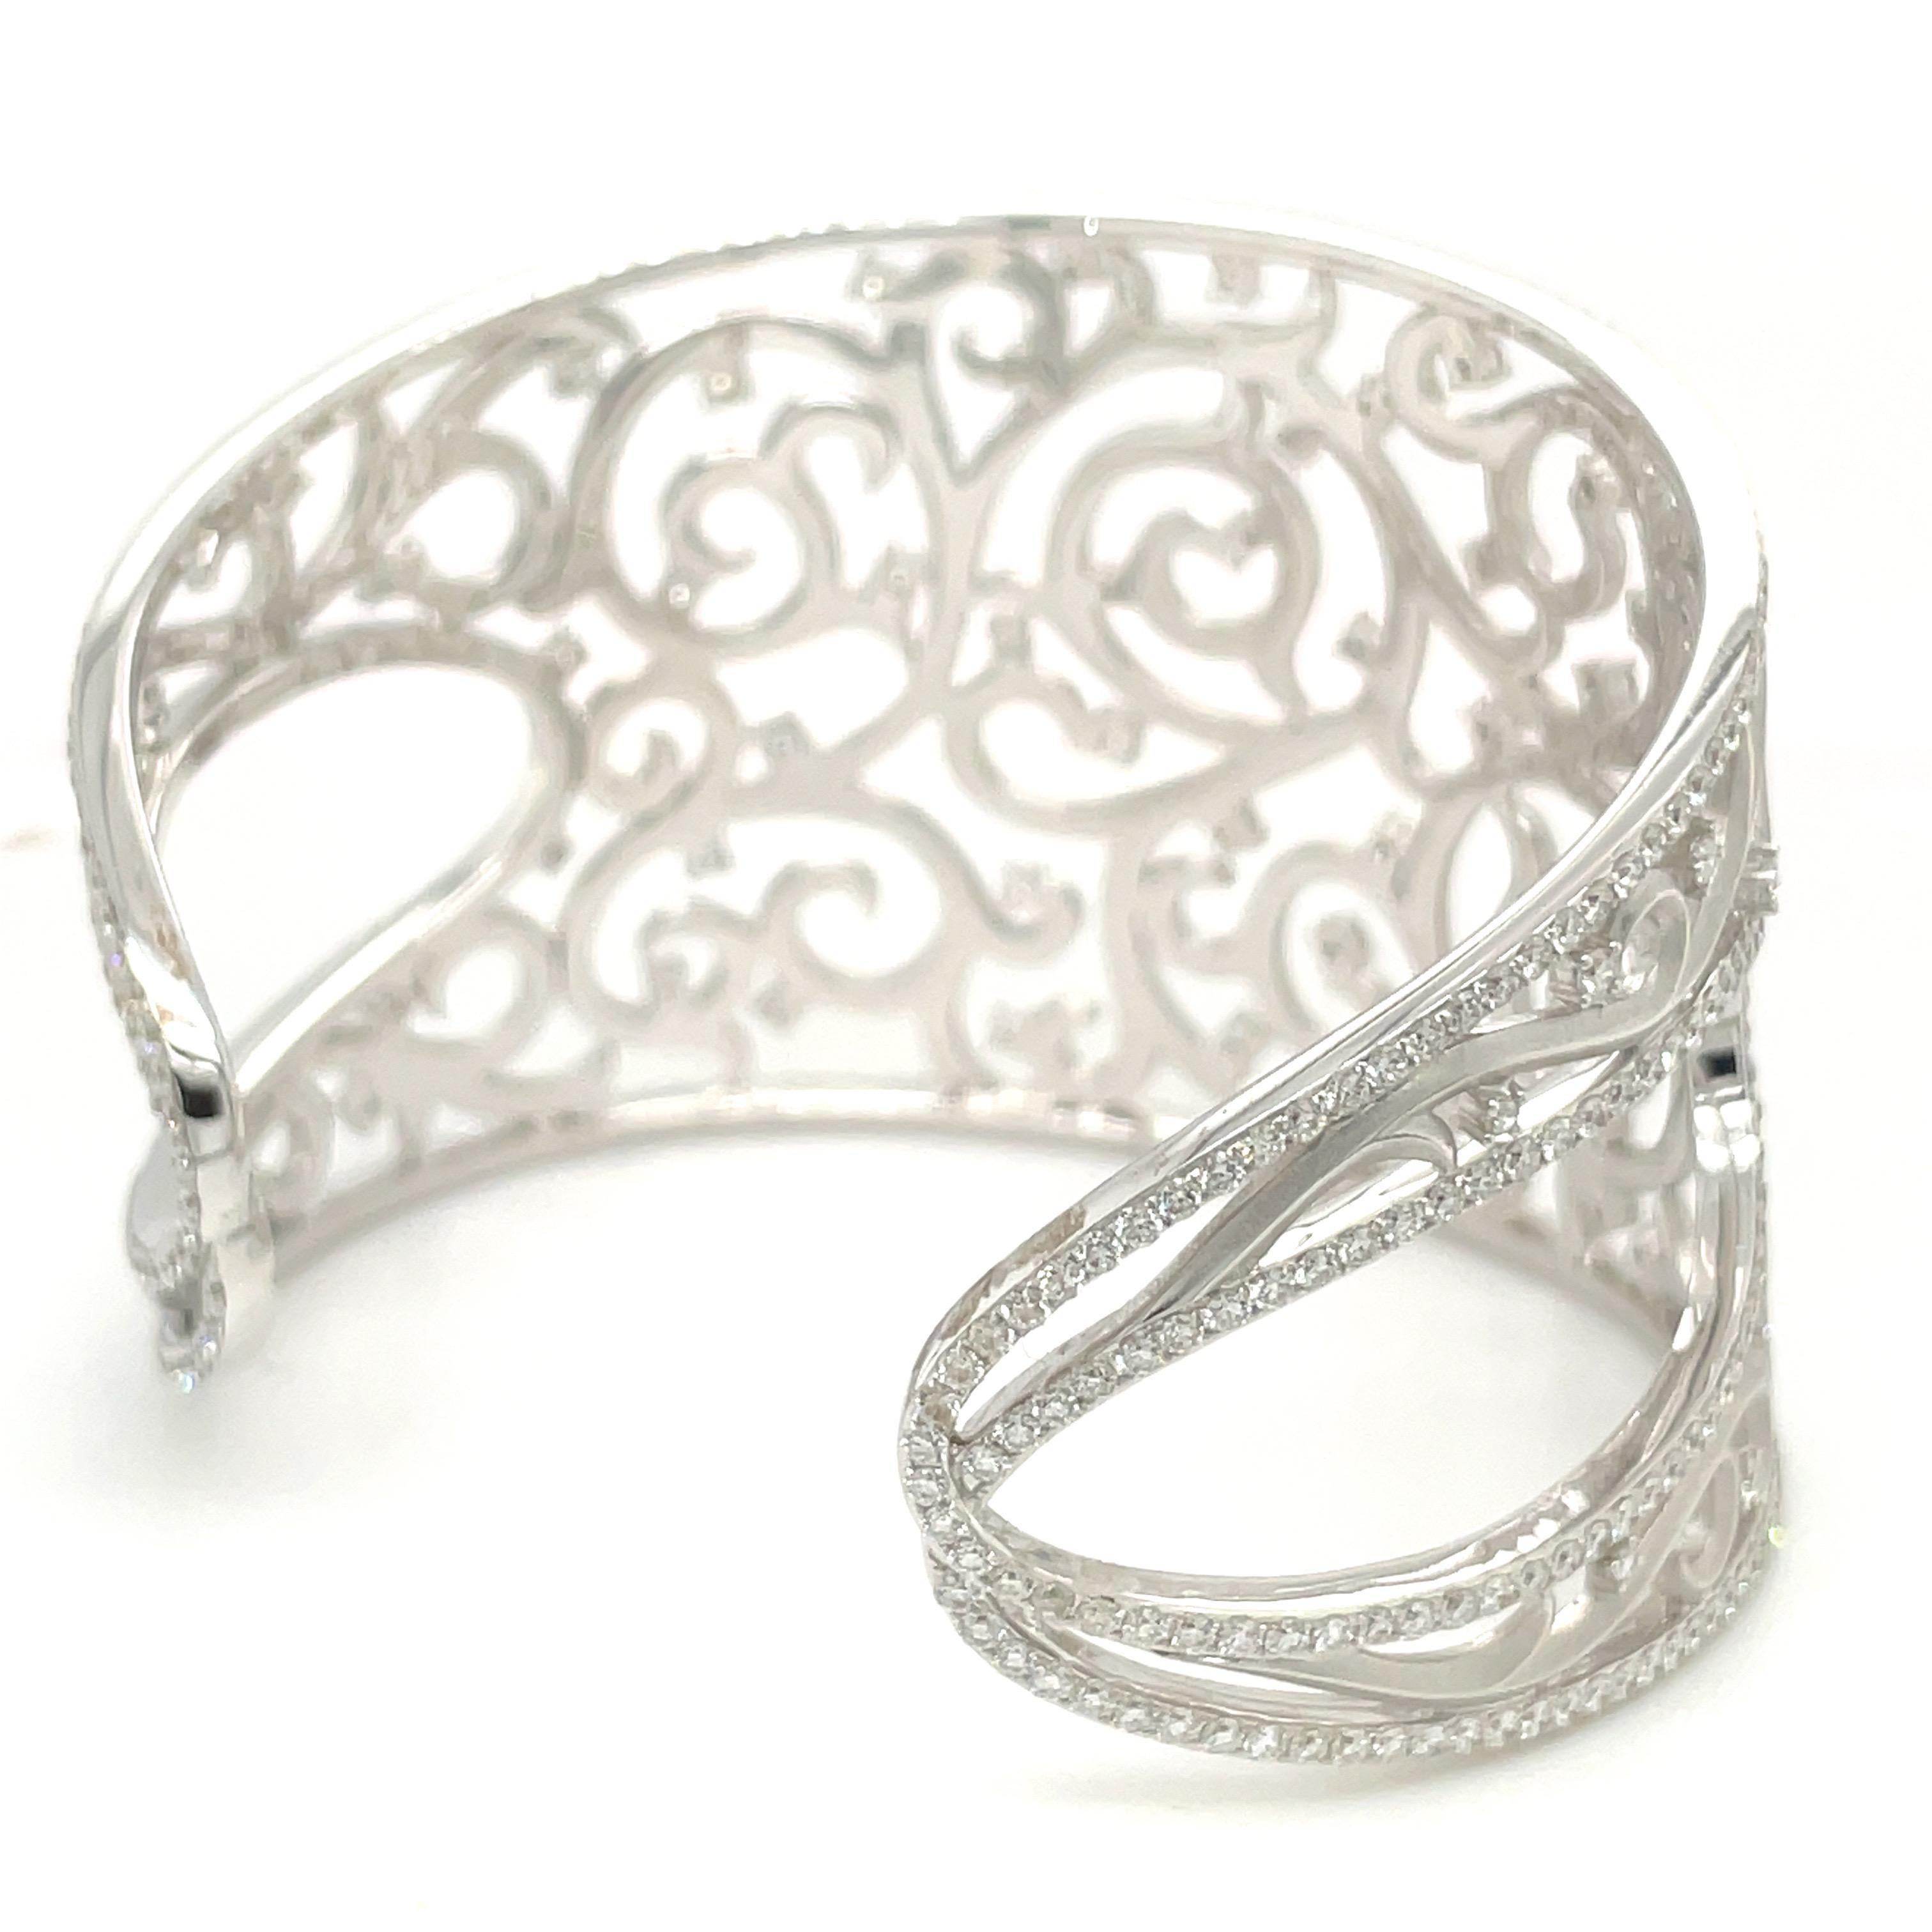 Cellini 18kt White Gold and Diamond 4.90Ct. Lace Cuff Bracelet For Sale 6